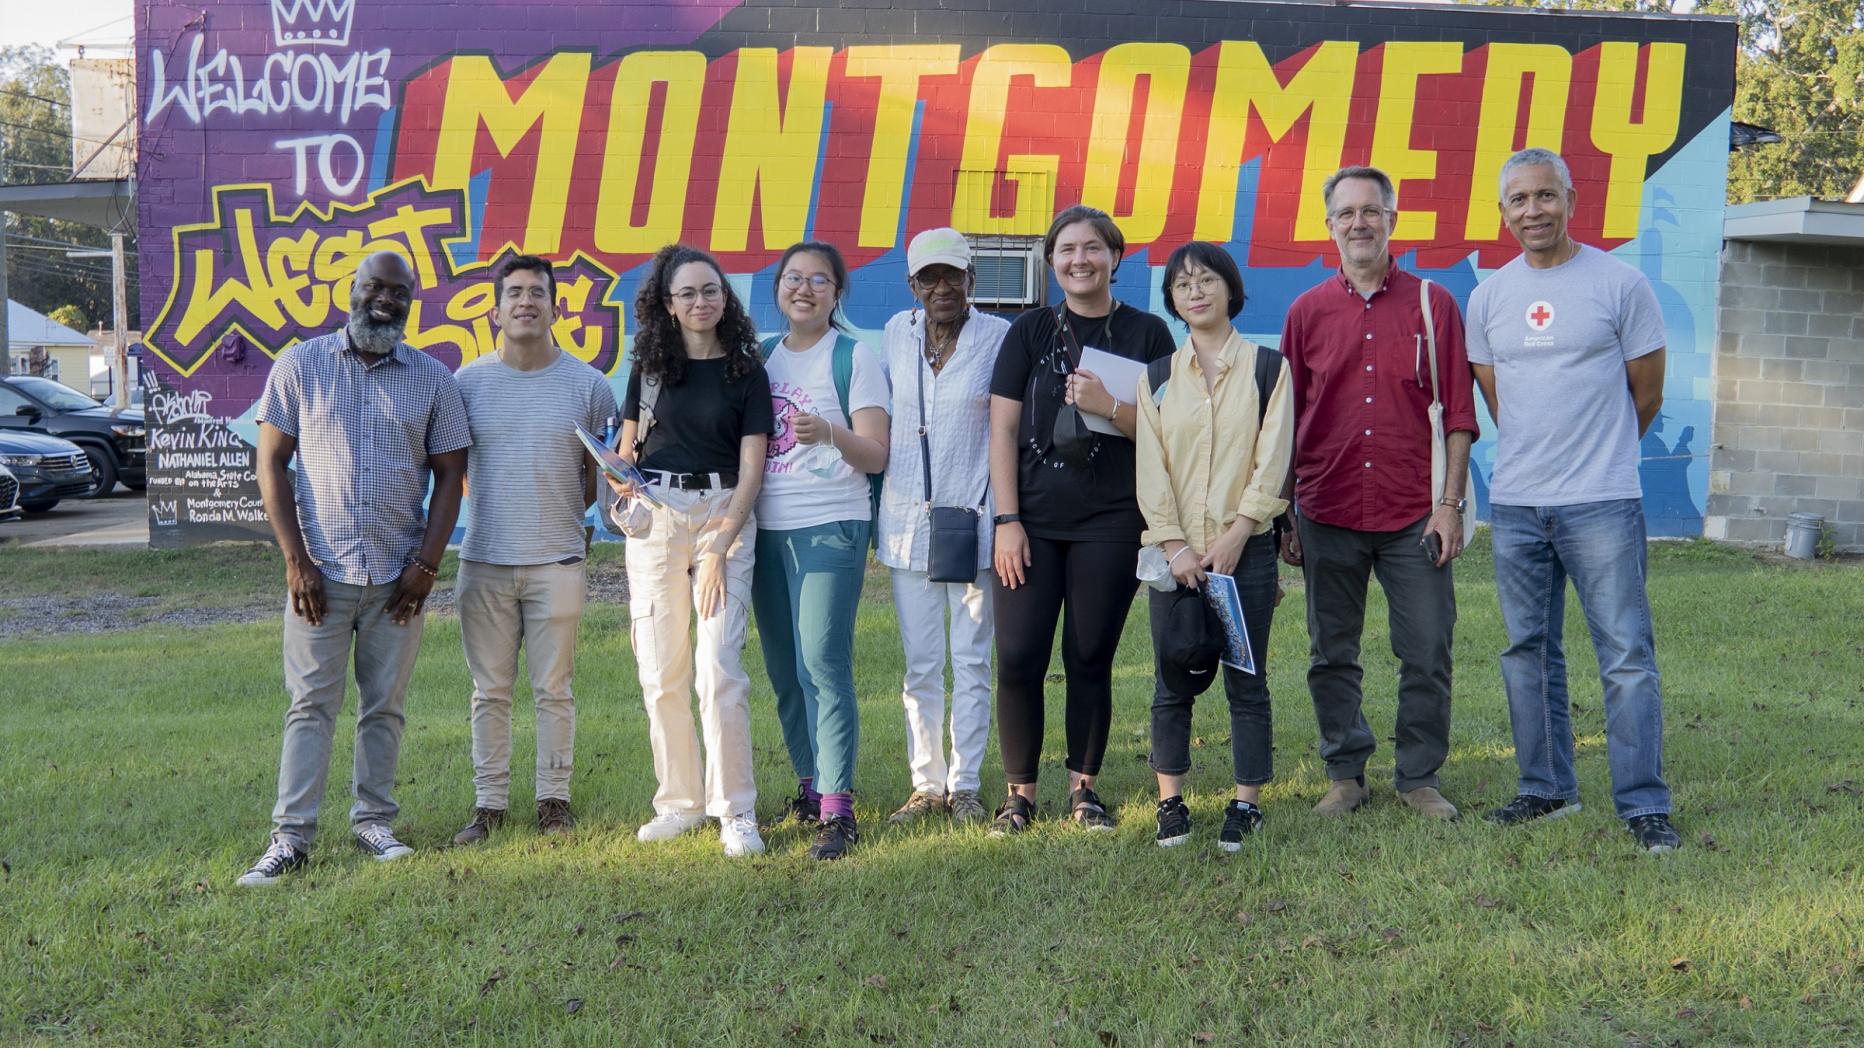 Group of people standing in front of colorful mural